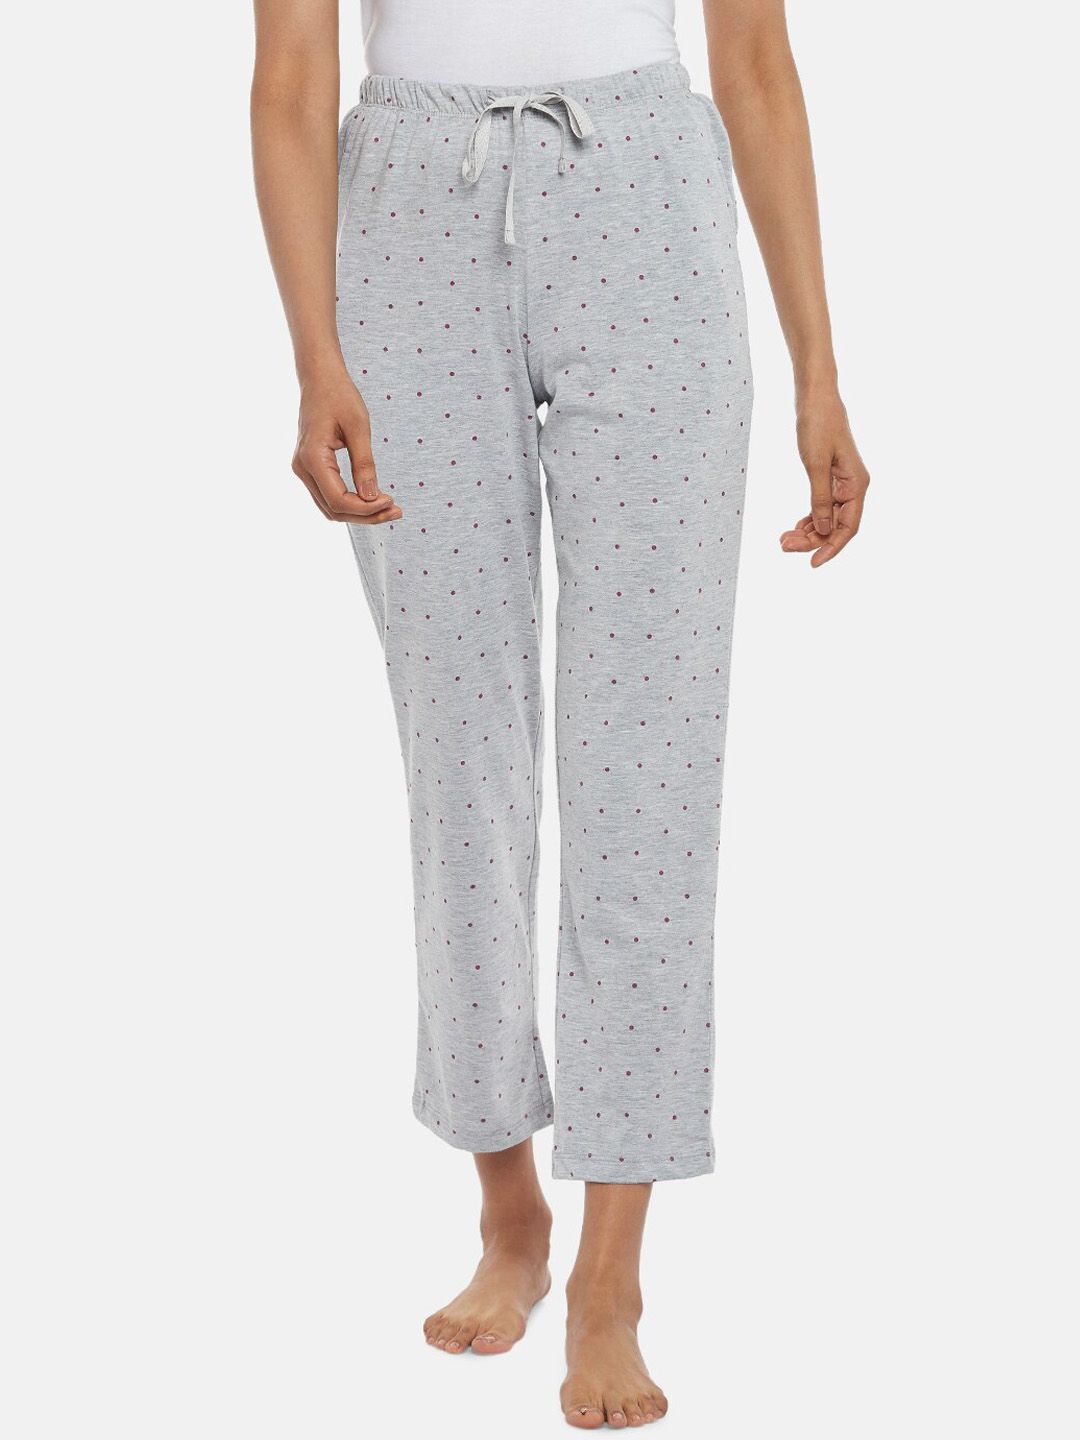 Dreamz by Pantaloons Women Grey Printed Cotton Lounge Pants Price in India